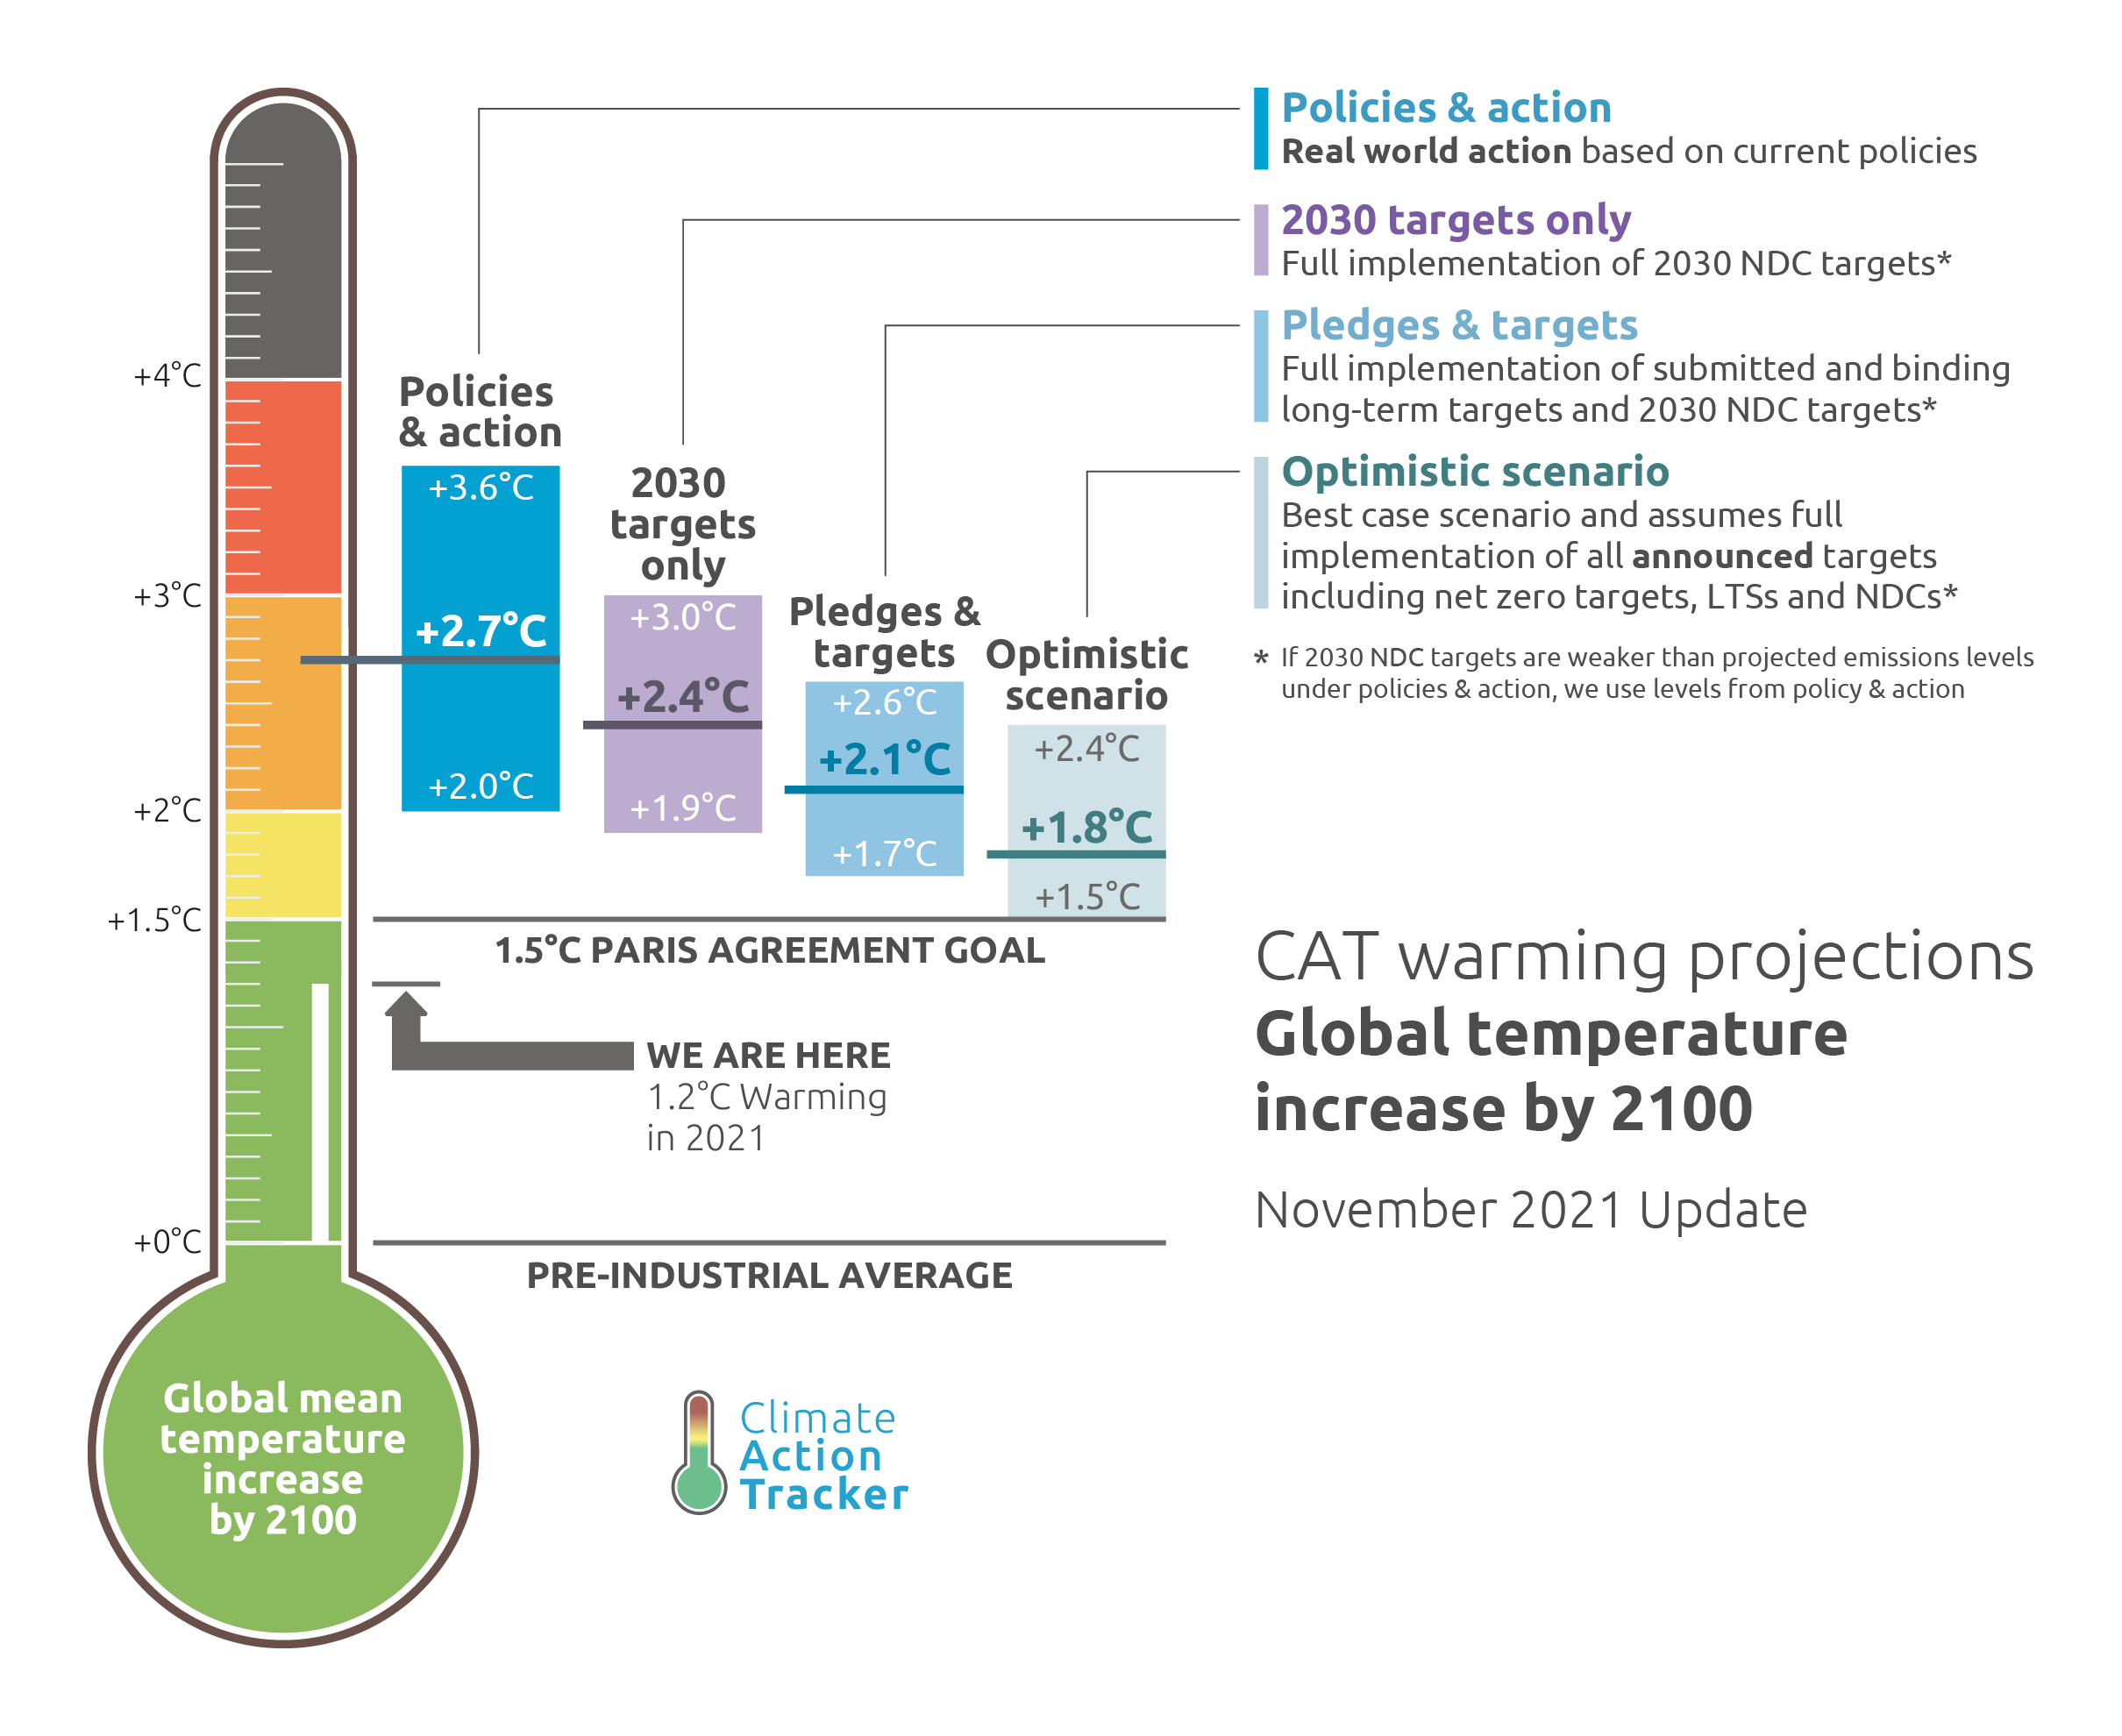 CAT Thermometer image